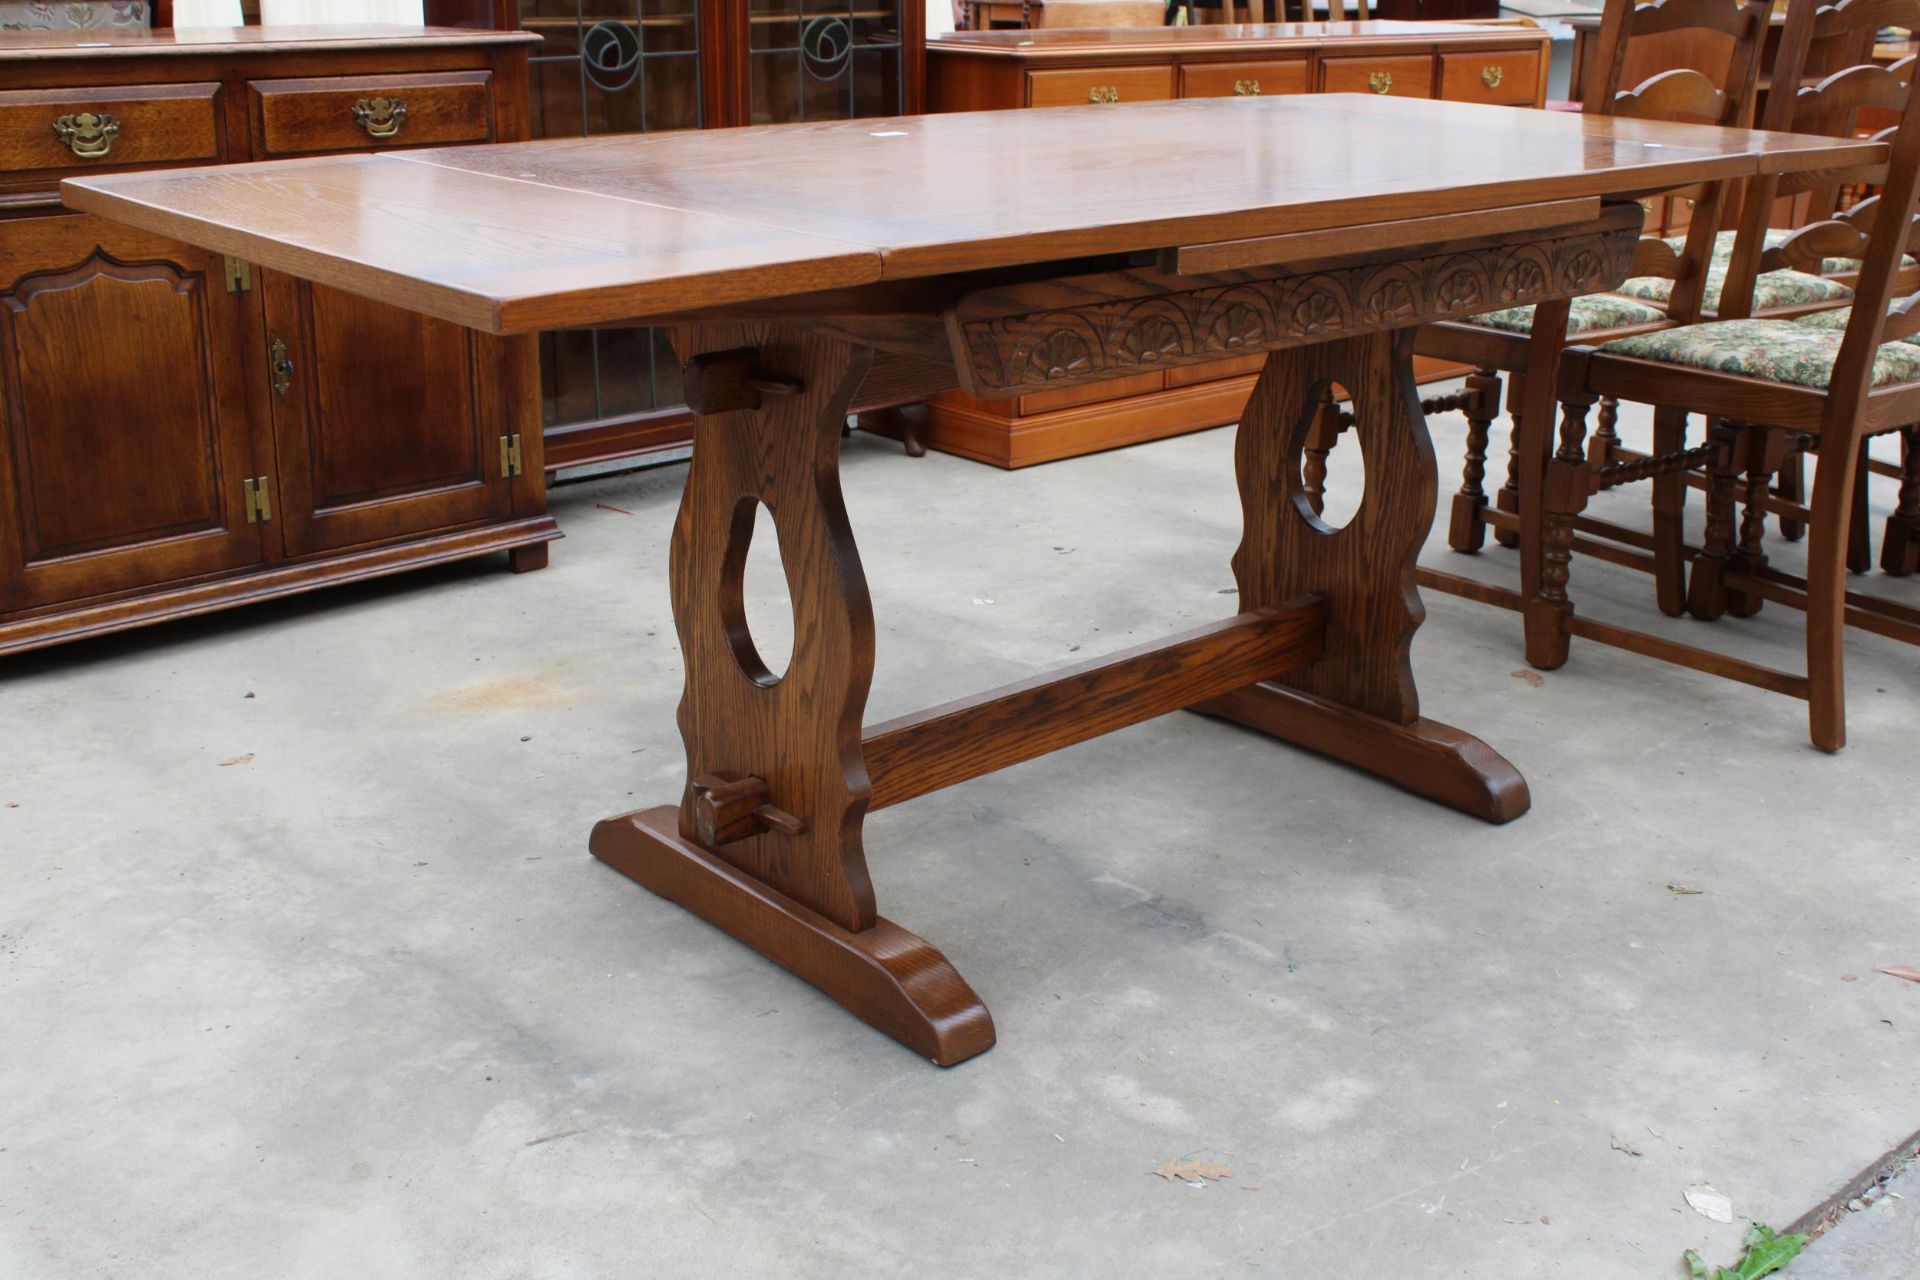 AN OAK JAYCEE REFECTORY STYLE DRAW-LEAF DINING TABLE, 48 X 32 INCHES (LEAVES 12 INCHES EACH) - Image 2 of 4